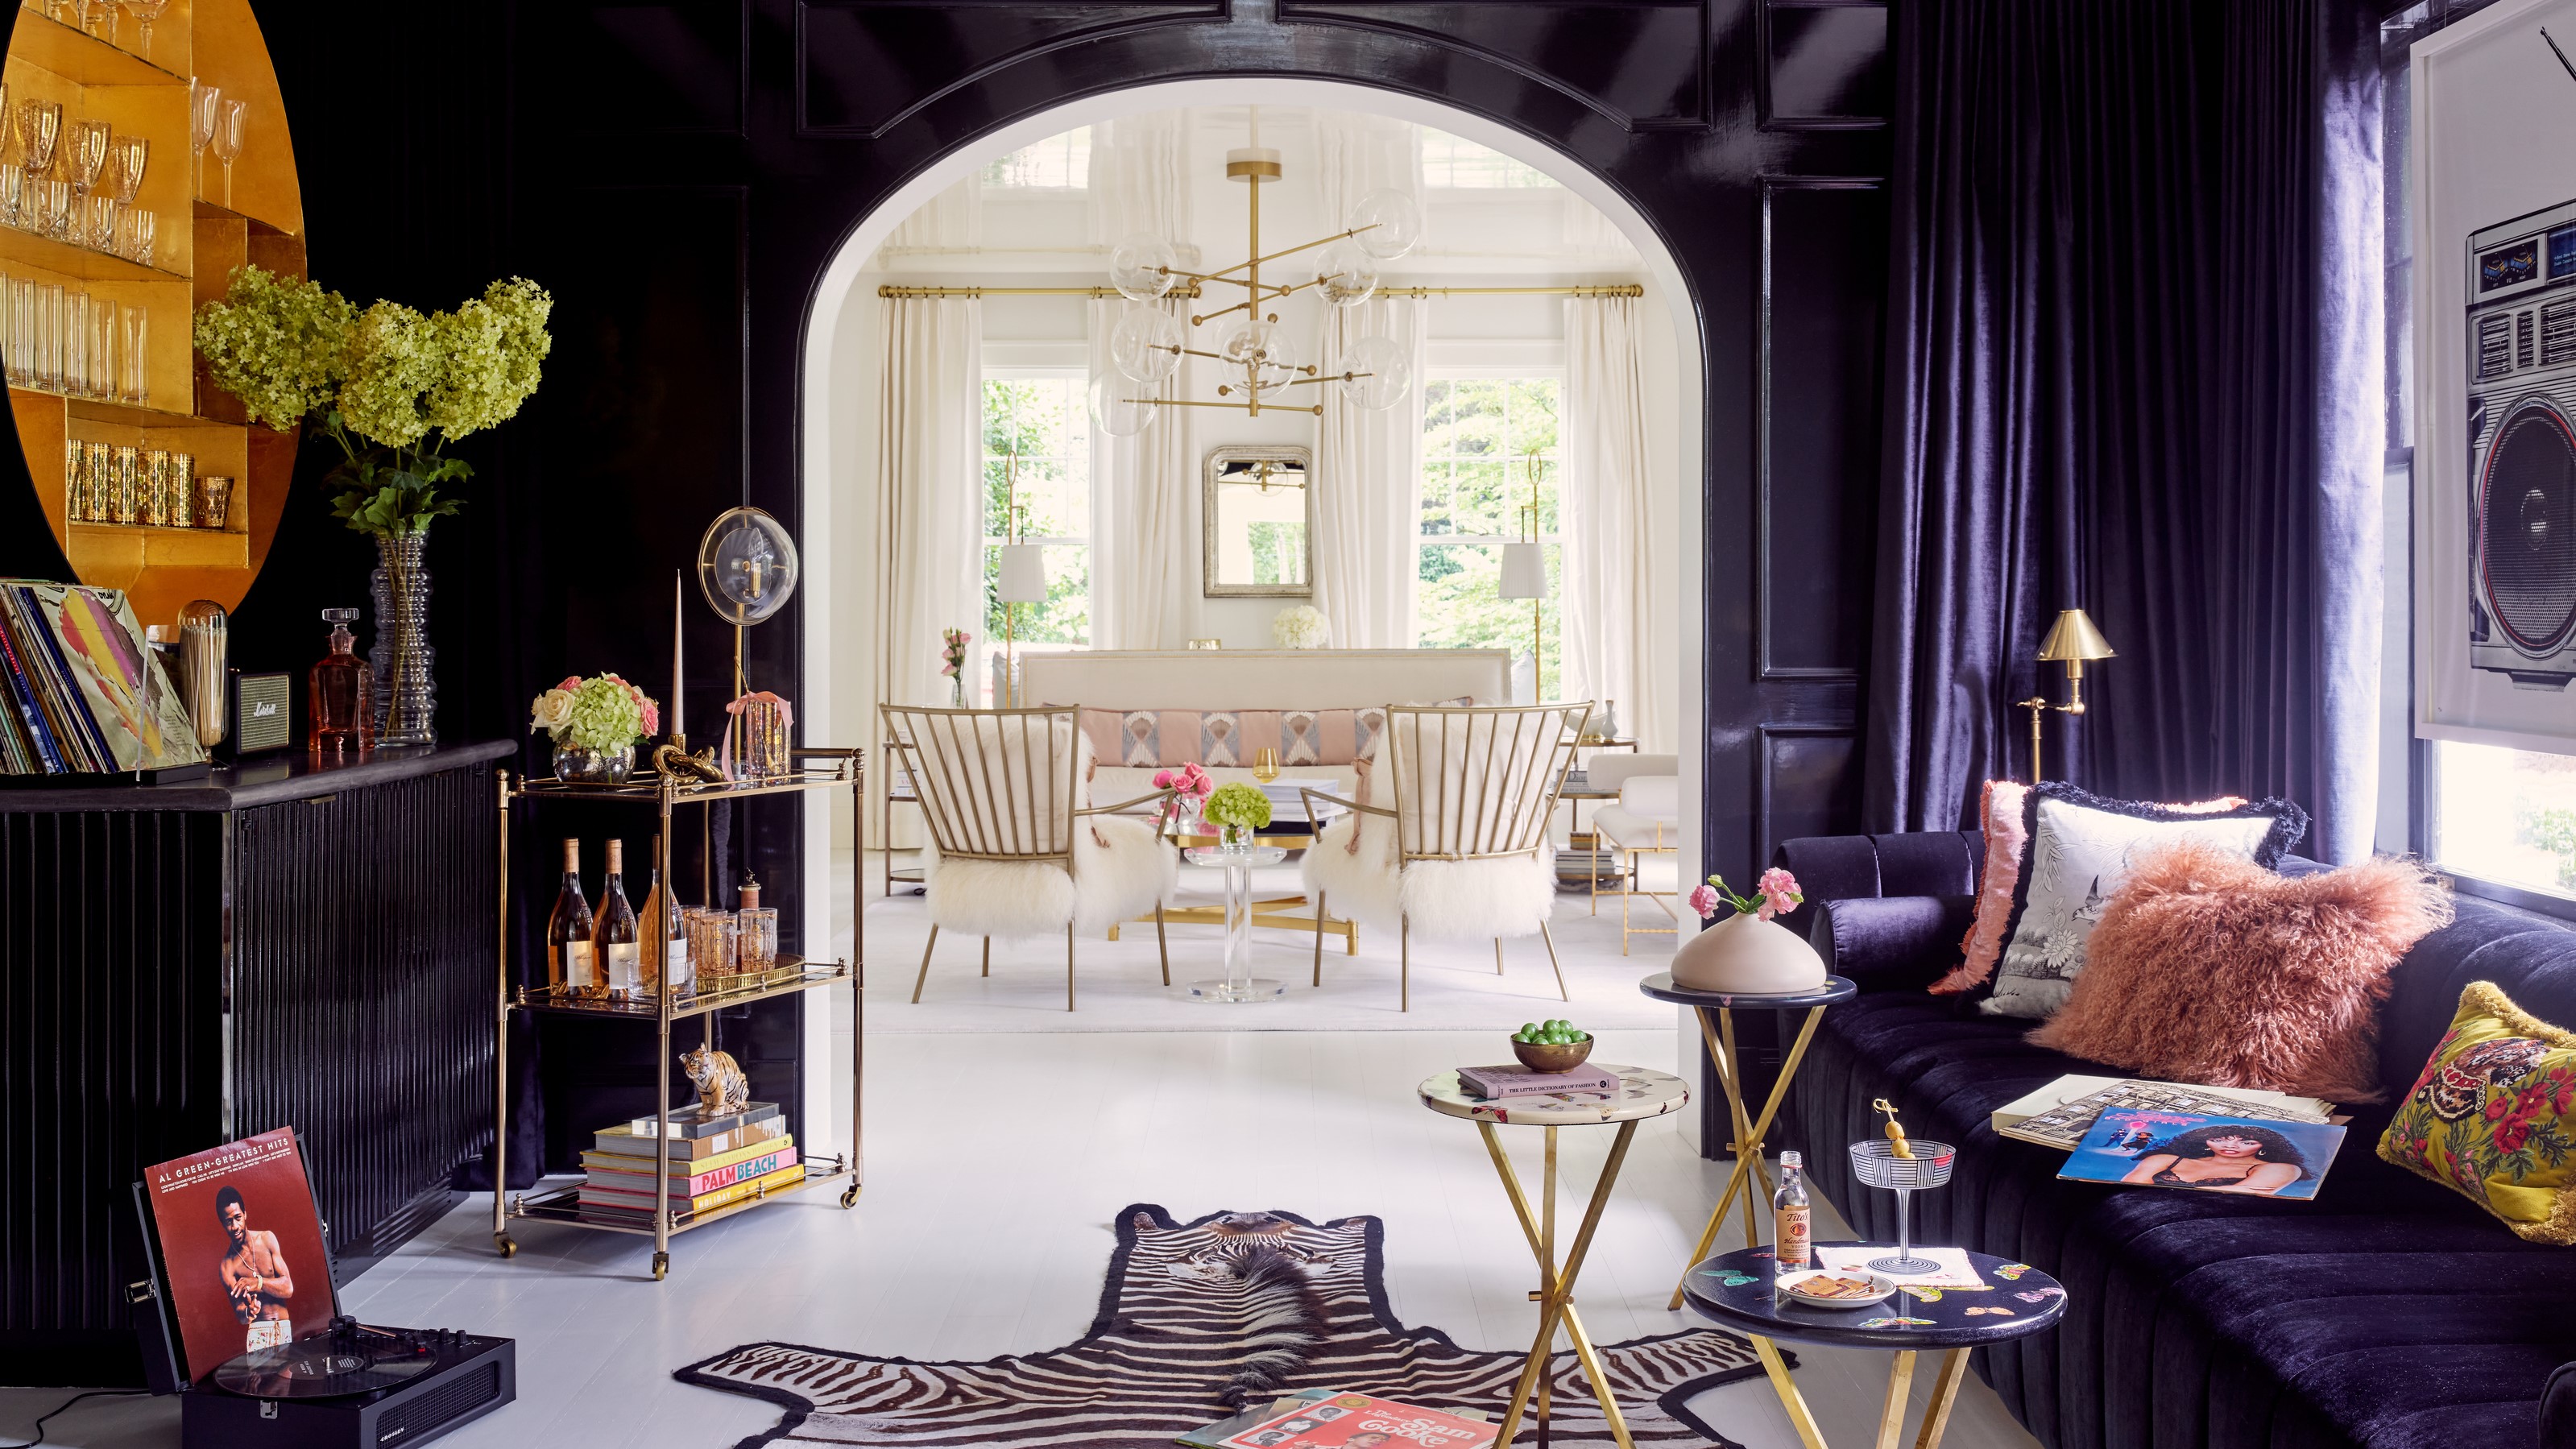 How To Realize The Hollywood Regency Style In Your Home